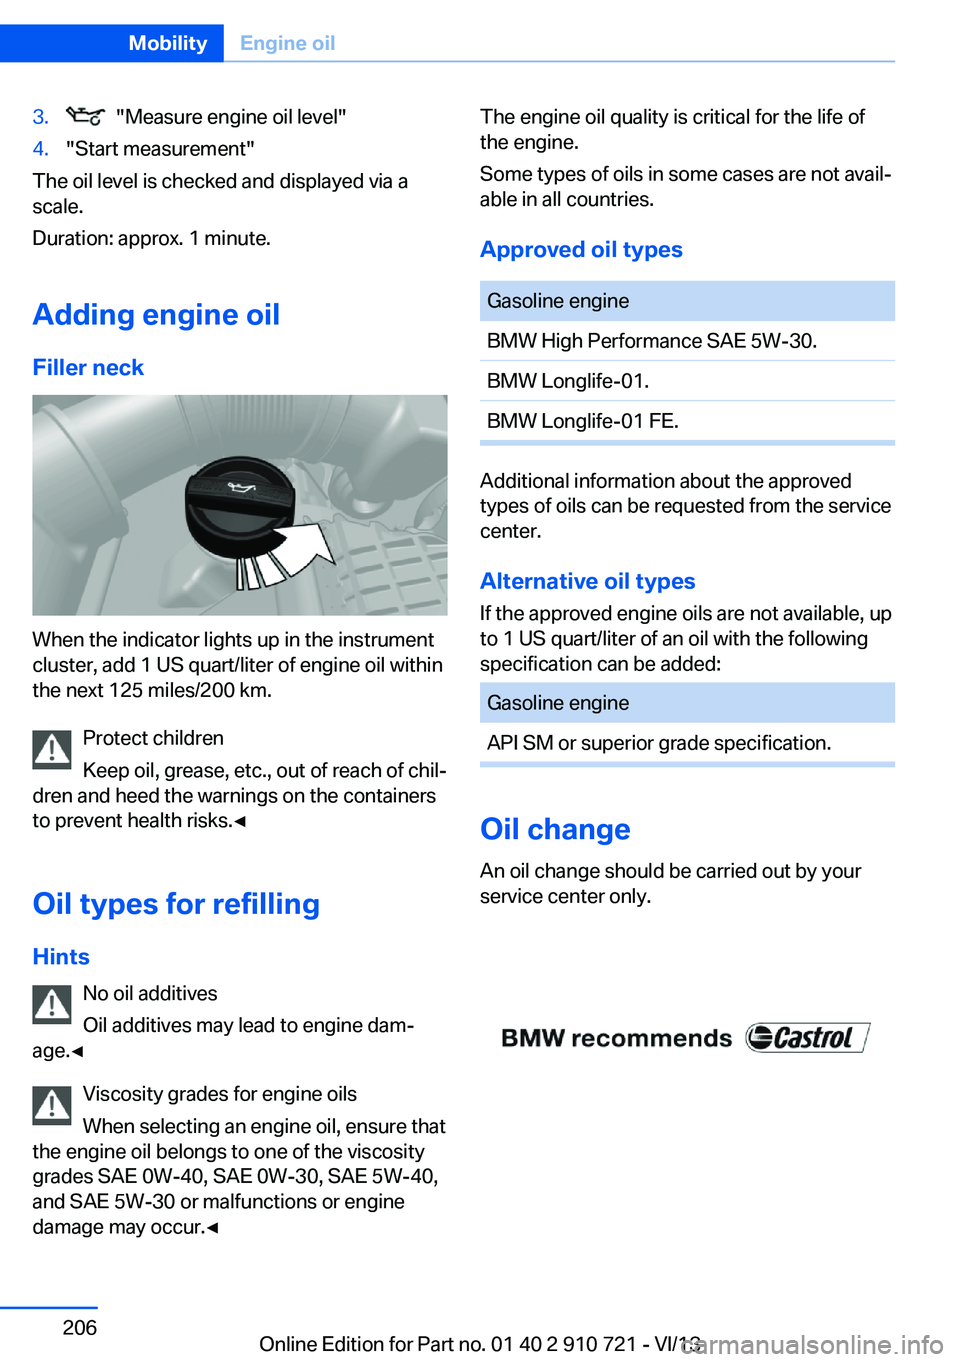 BMW 640I CONVERTIBLE 2014  Owners Manual 3.  "Measure engine oil level"4."Start measurement"
The oil level is checked and displayed via a
scale.
Duration: approx. 1 minute.
Adding engine oil Filler neck
When the indicator lig